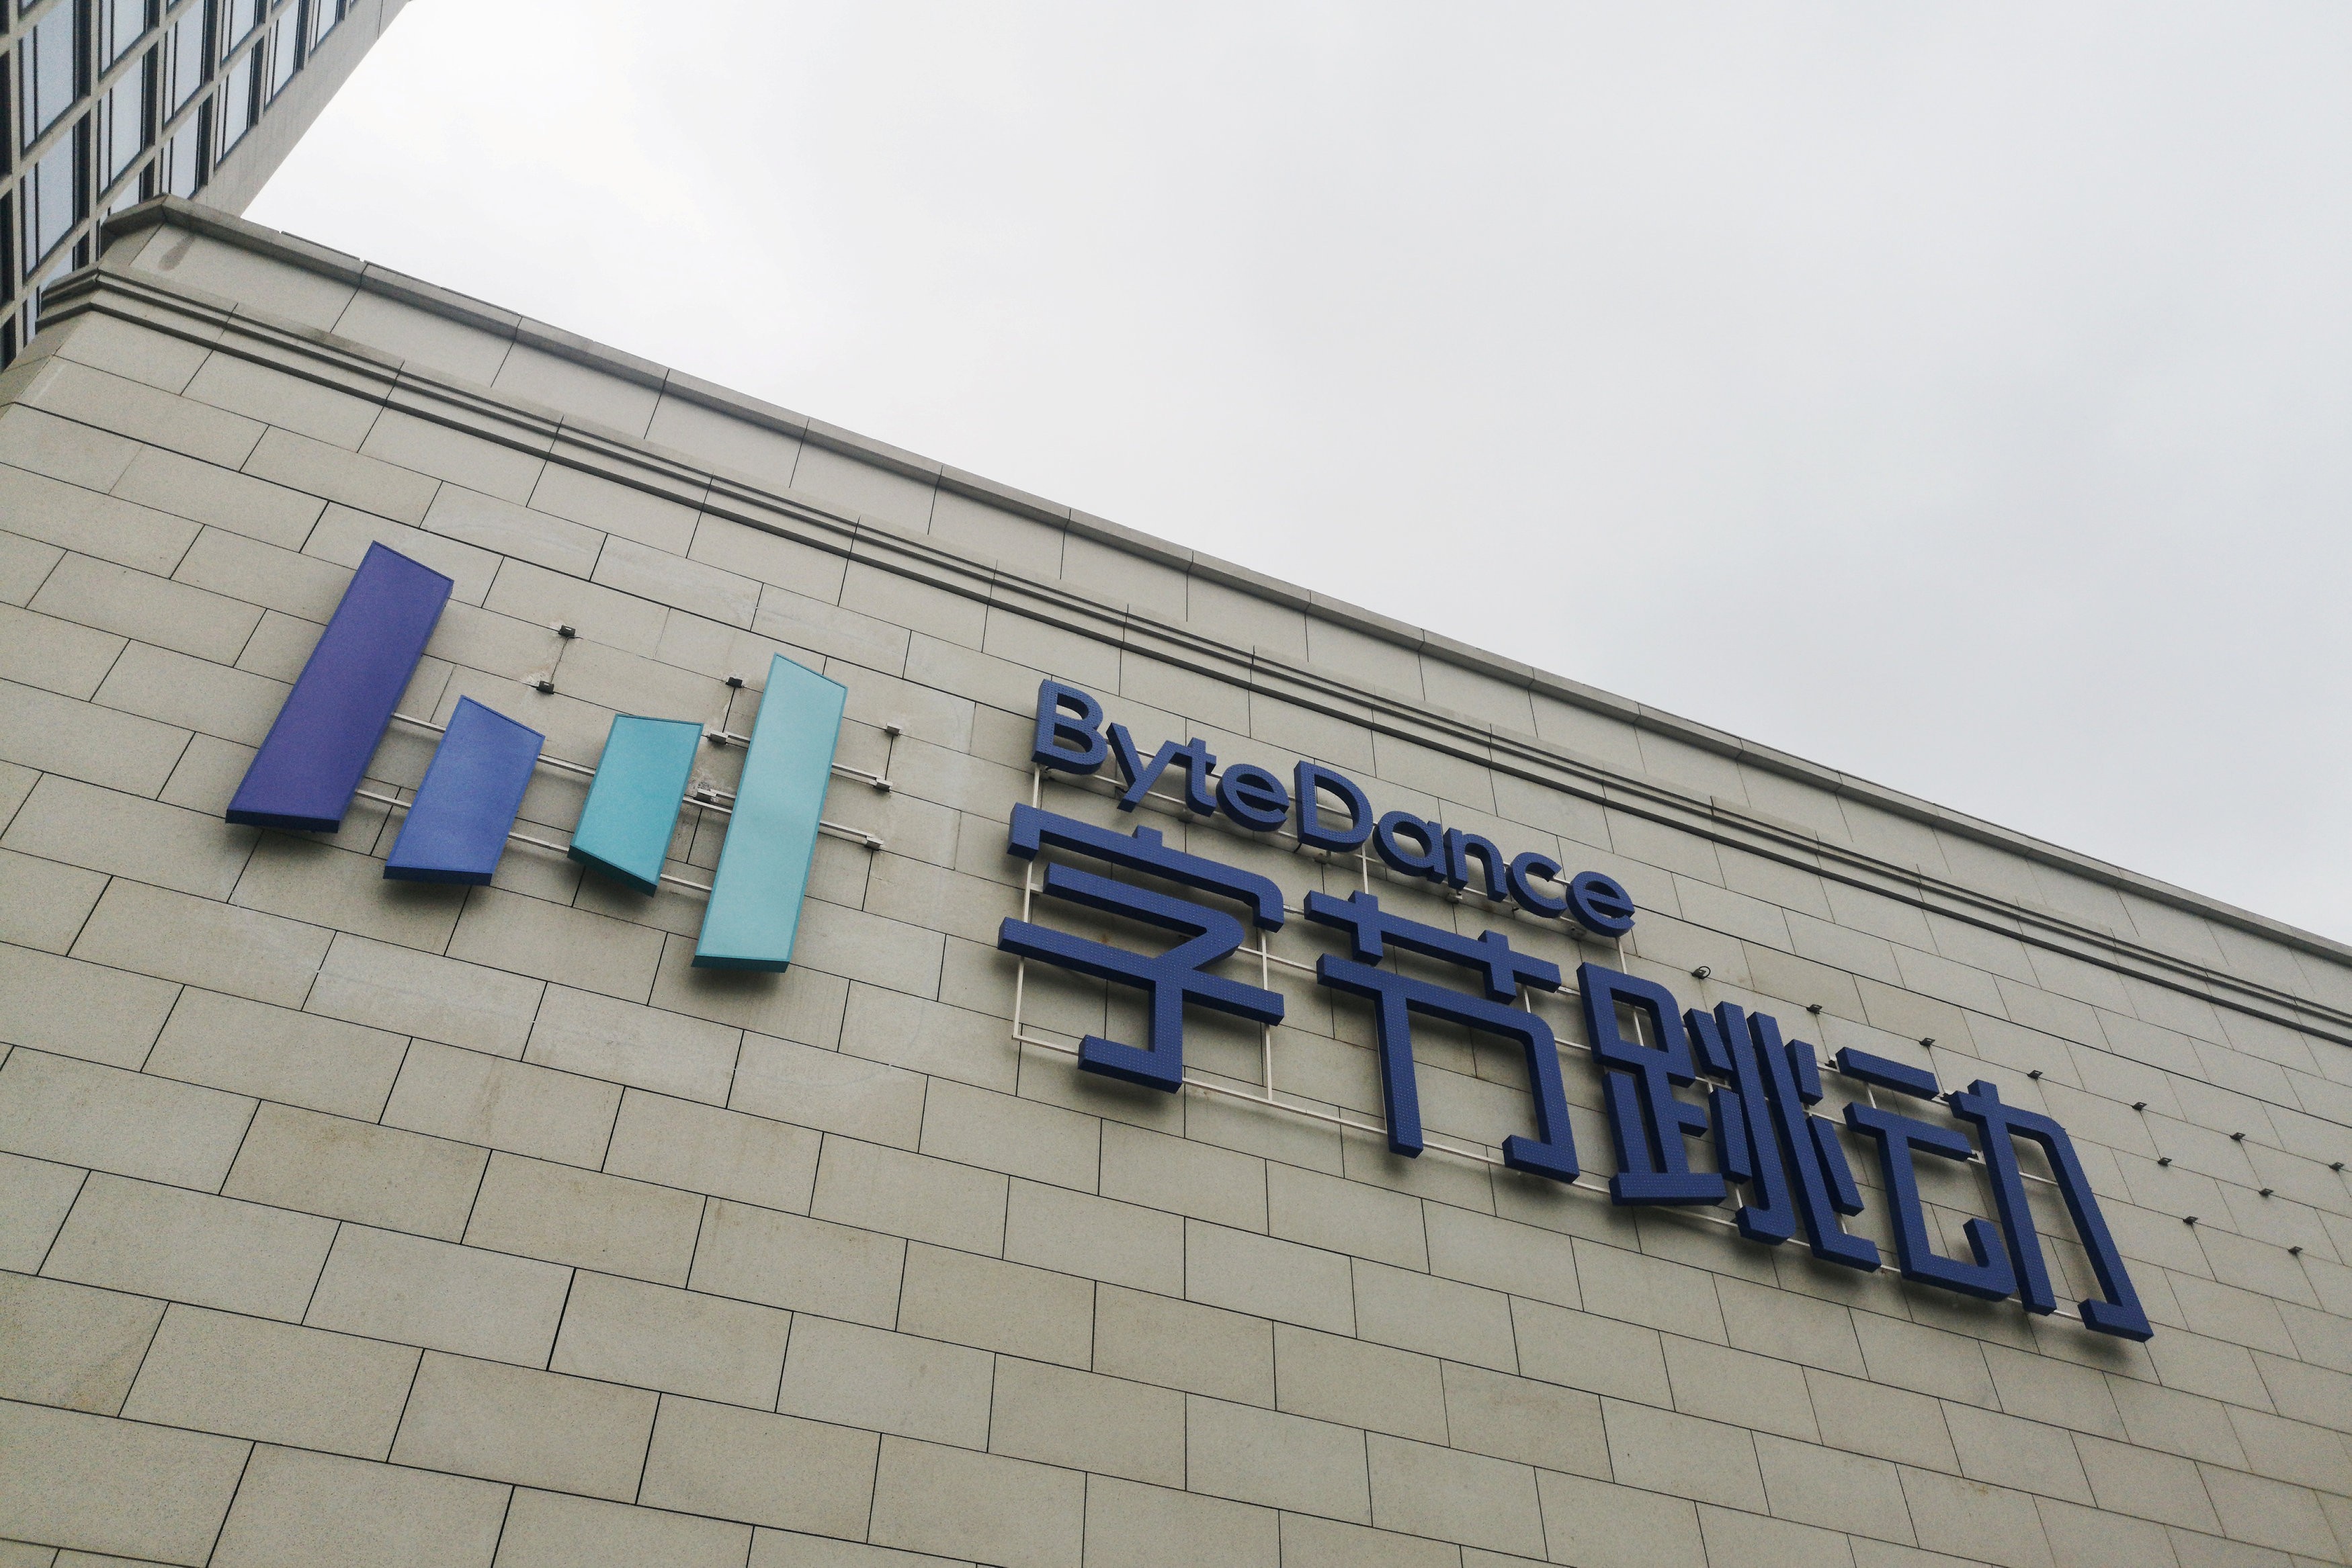 A new Bytedance sign is seen on the facade of its headquarters in Beijing, China August 8, 2018. Photo: Reuters